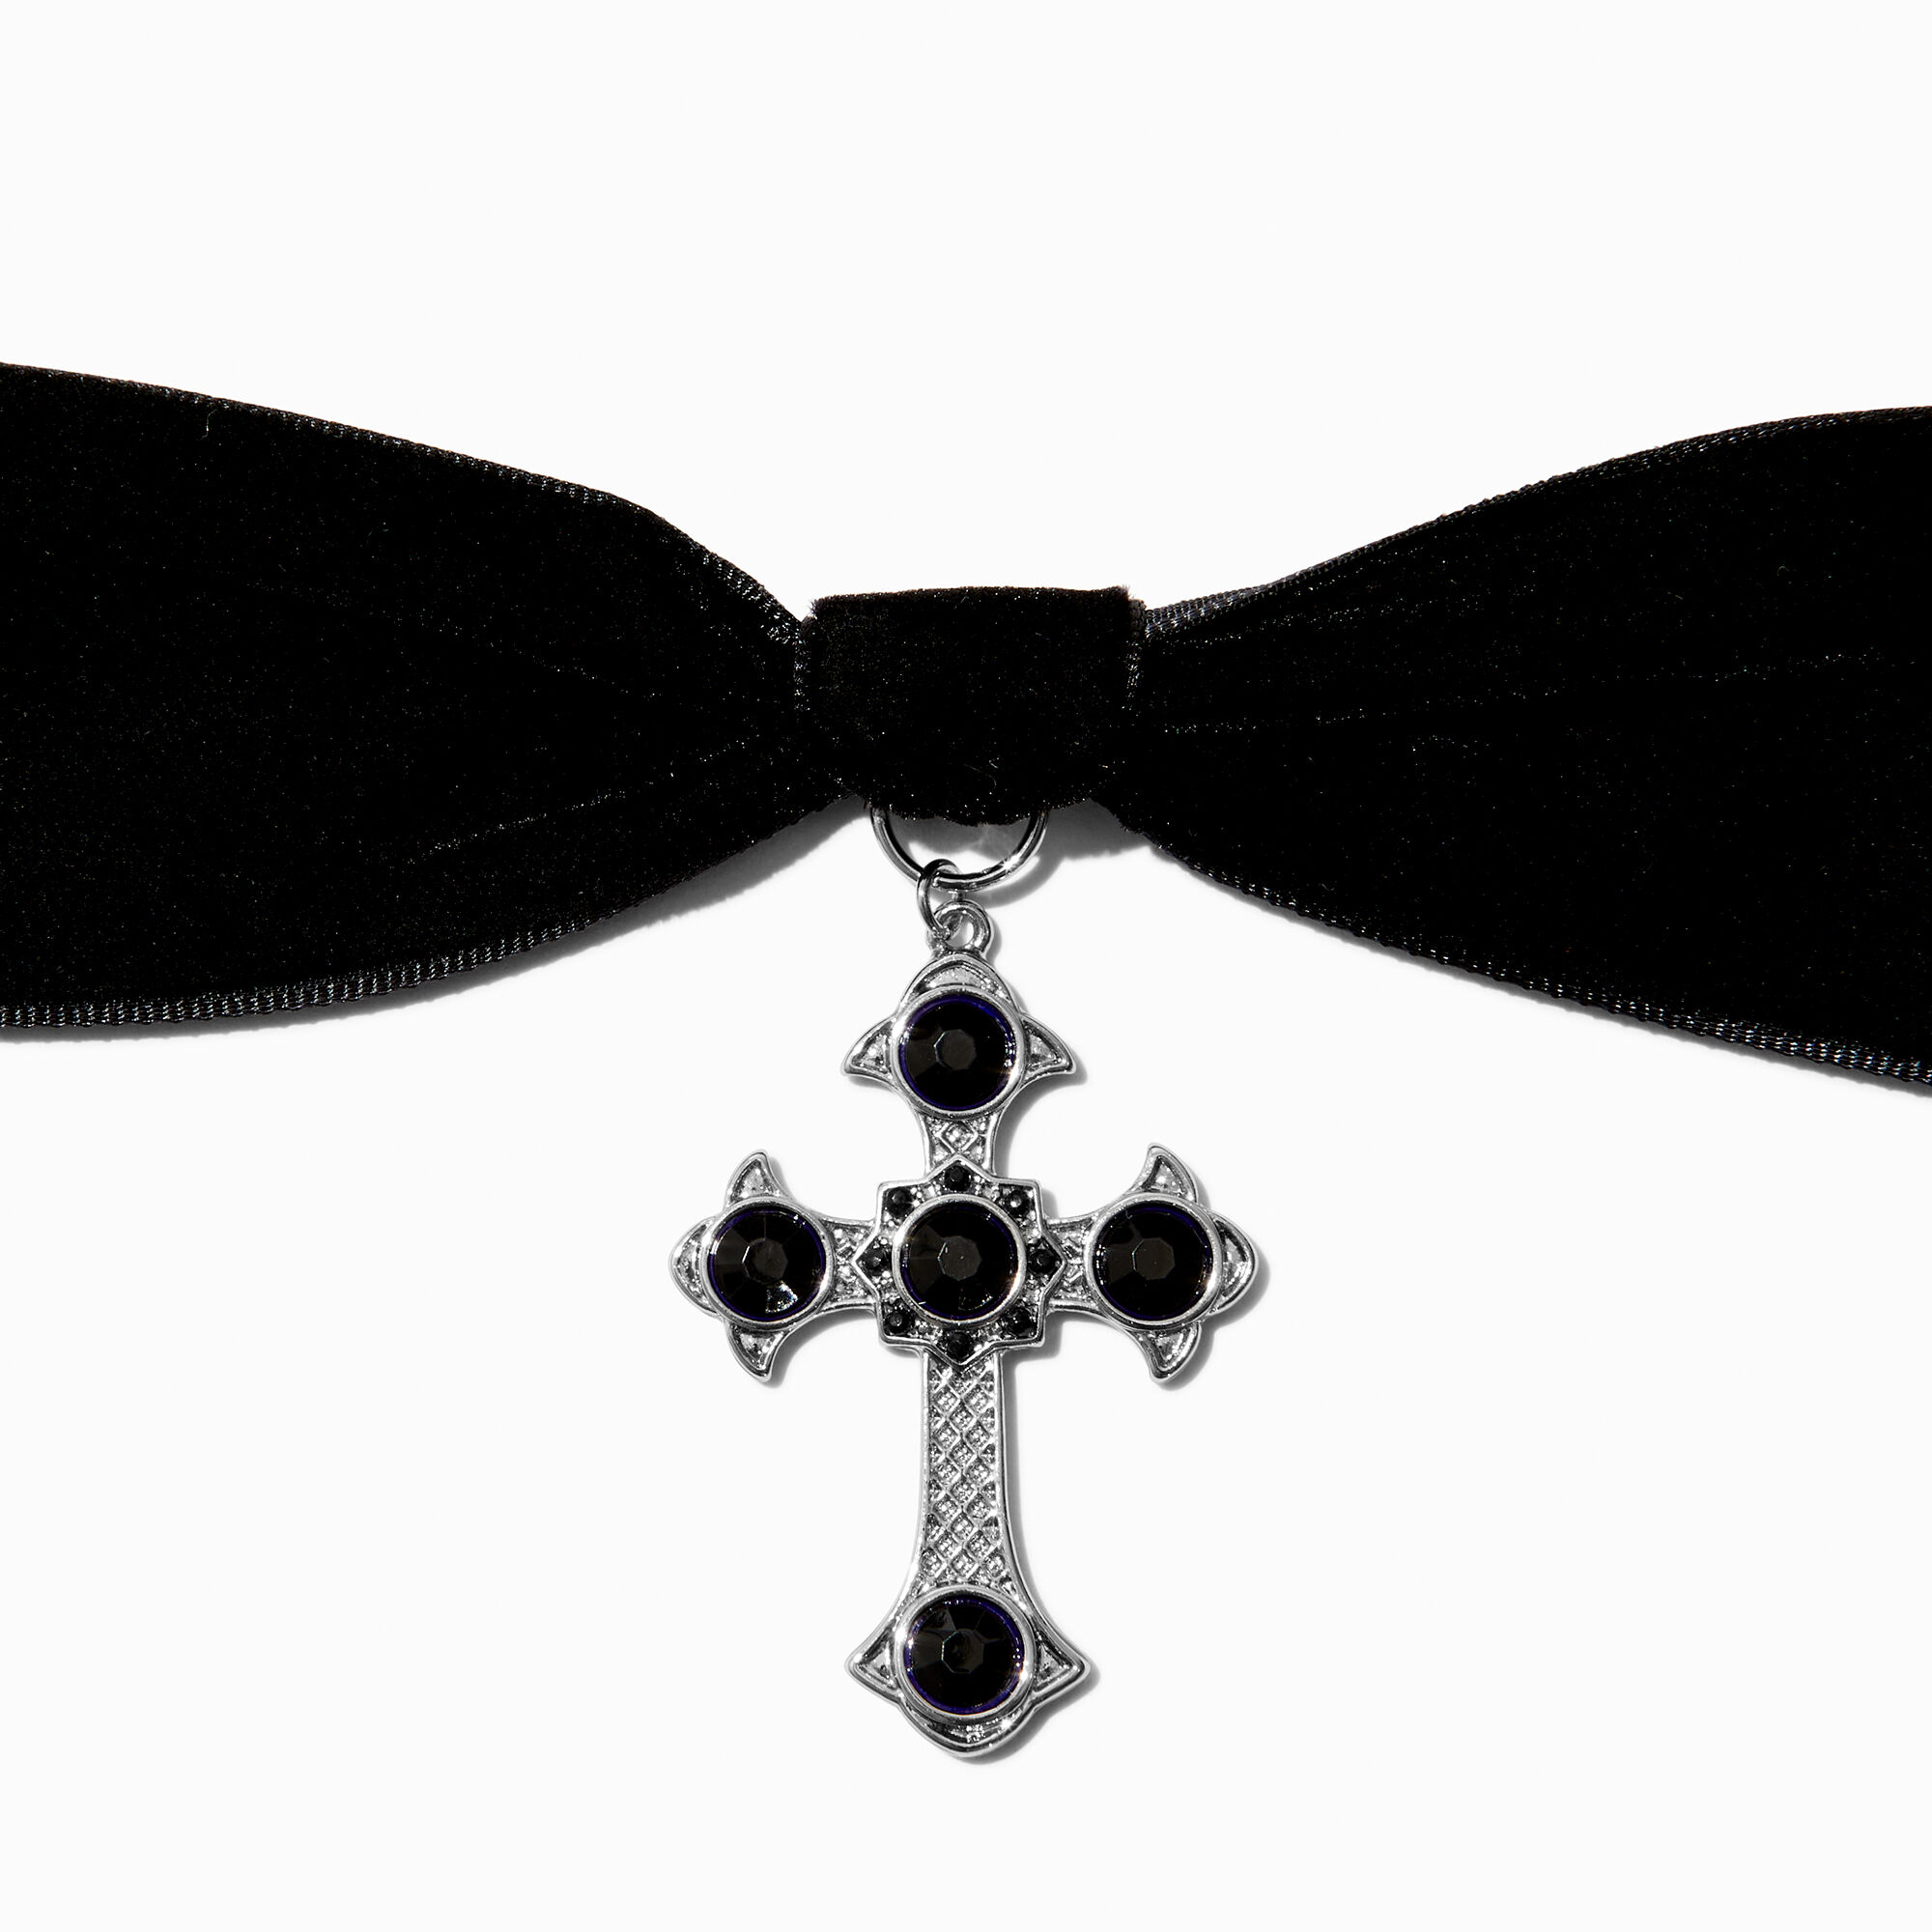 View Claires Cross Choker Necklace Black information